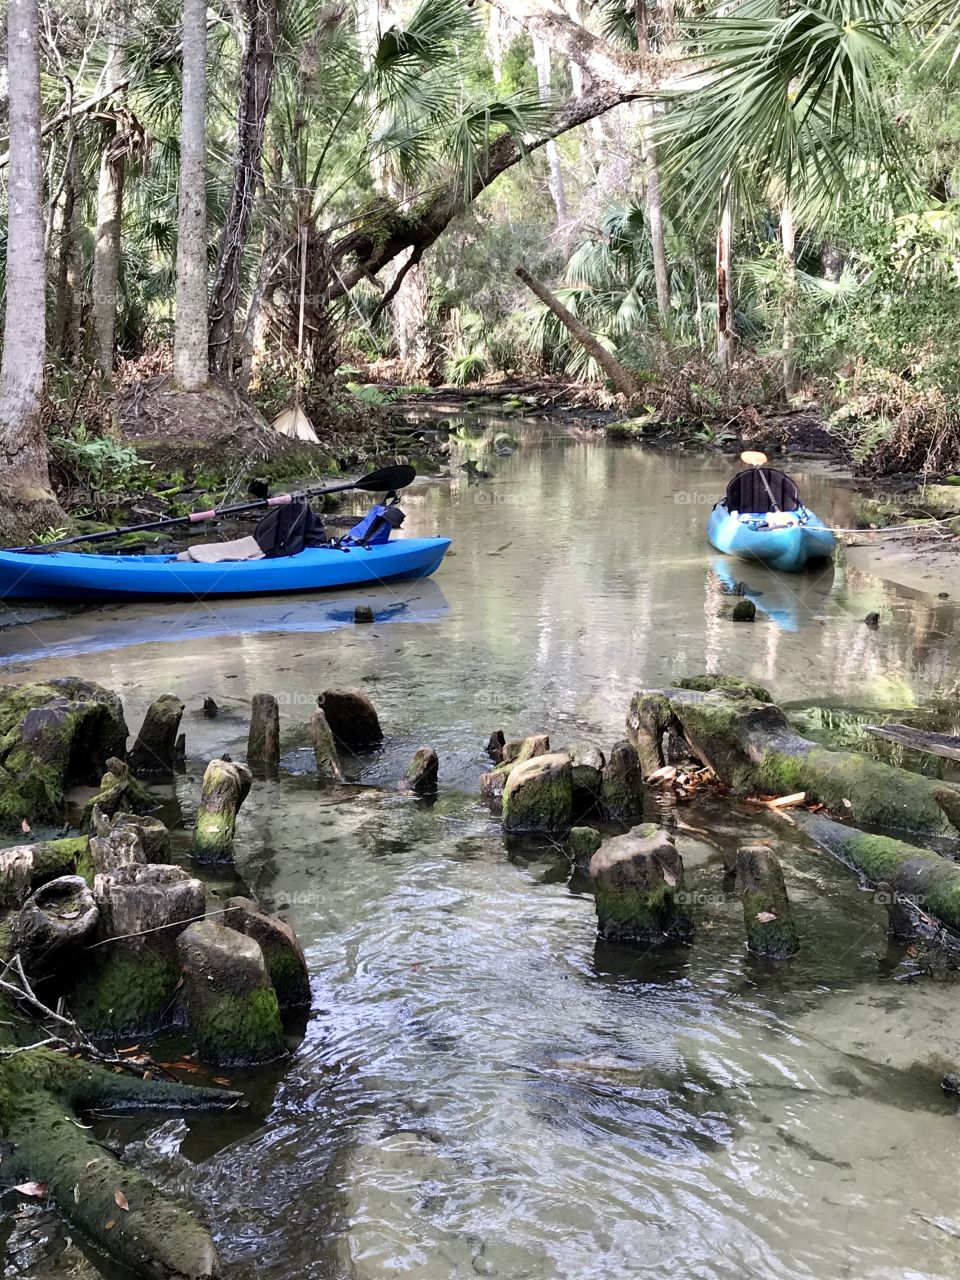 Exploring the Baird’s River by kayaking and walking the river. 